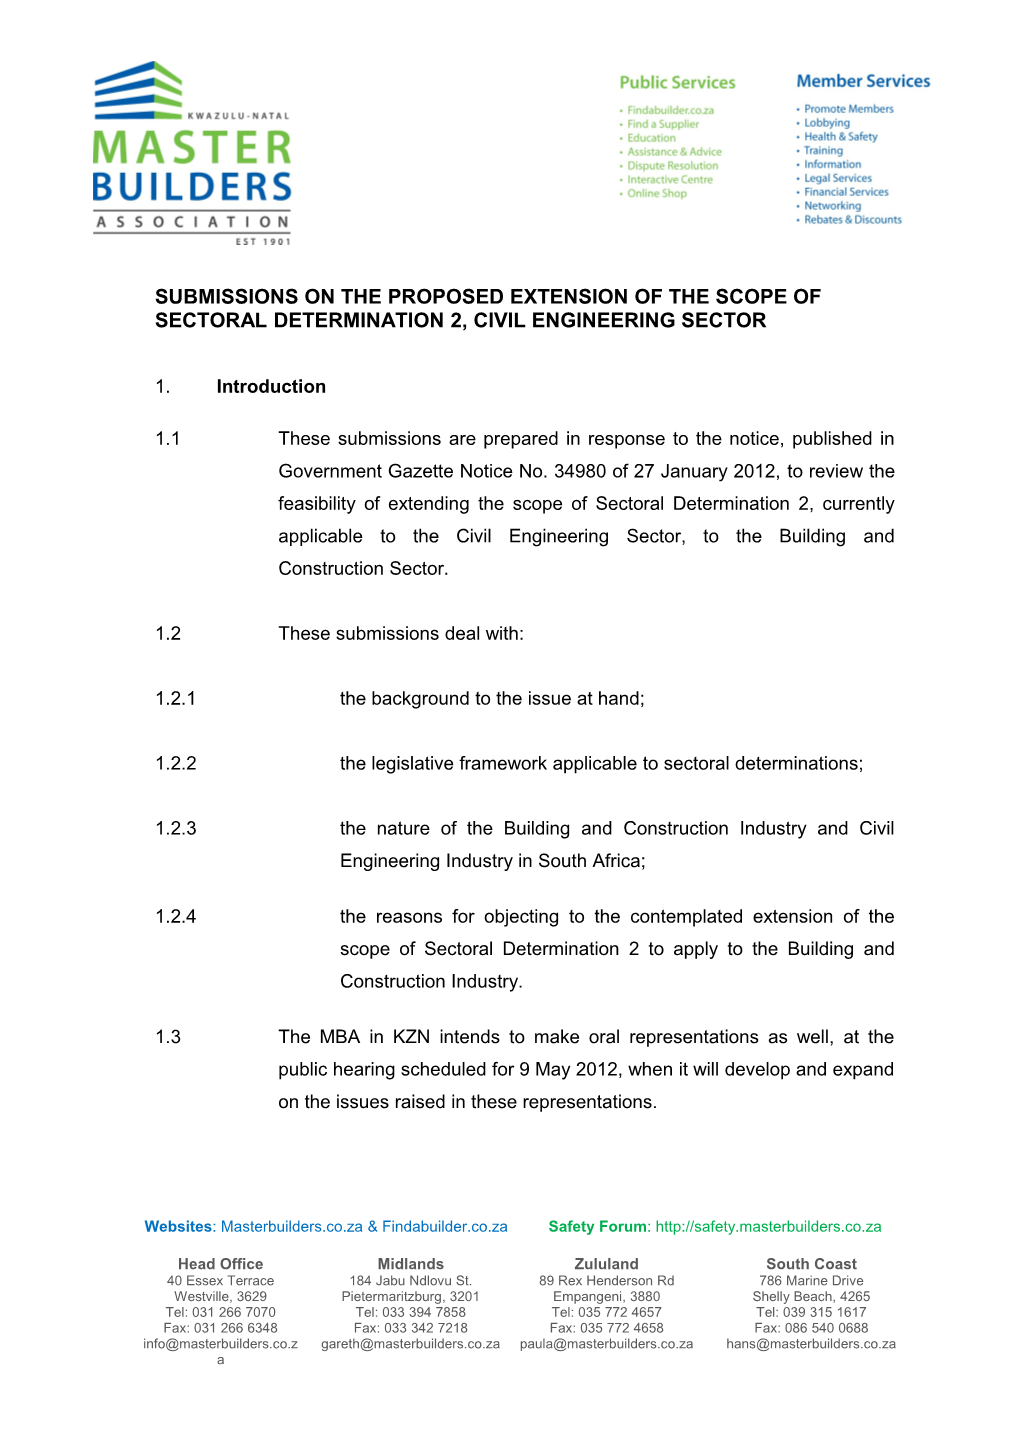 Submissions on the Proposed Extension of the Scope of Sectoral Determination 2, Civil